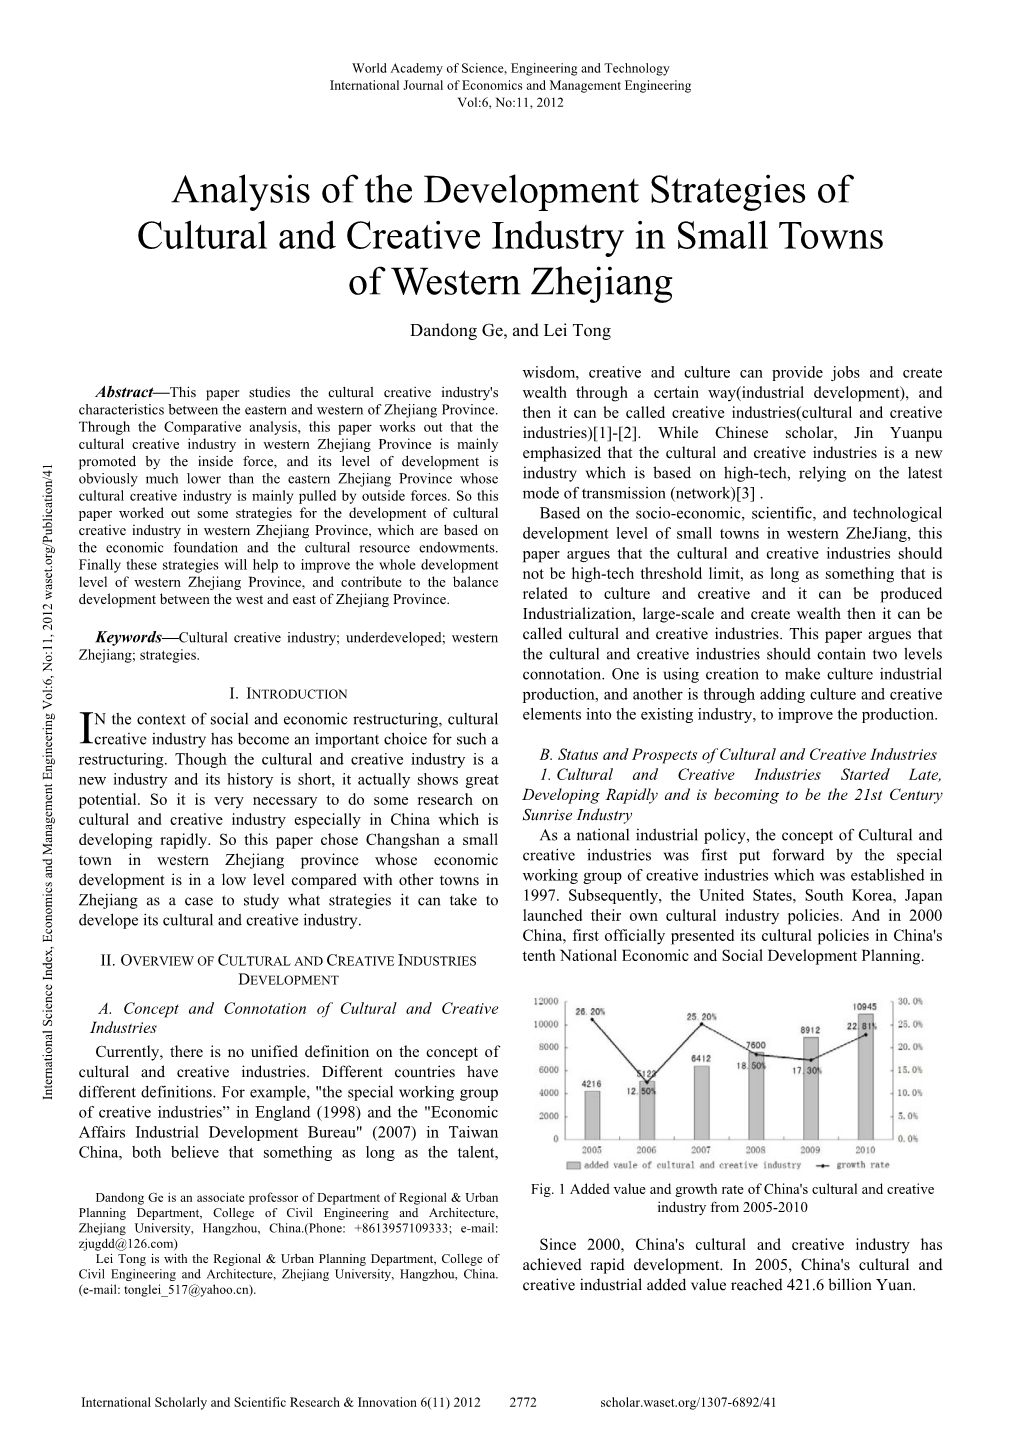 Analysis of the Development Strategies of Cultural and Creative Industry in Small Towns of Western Zhejiang